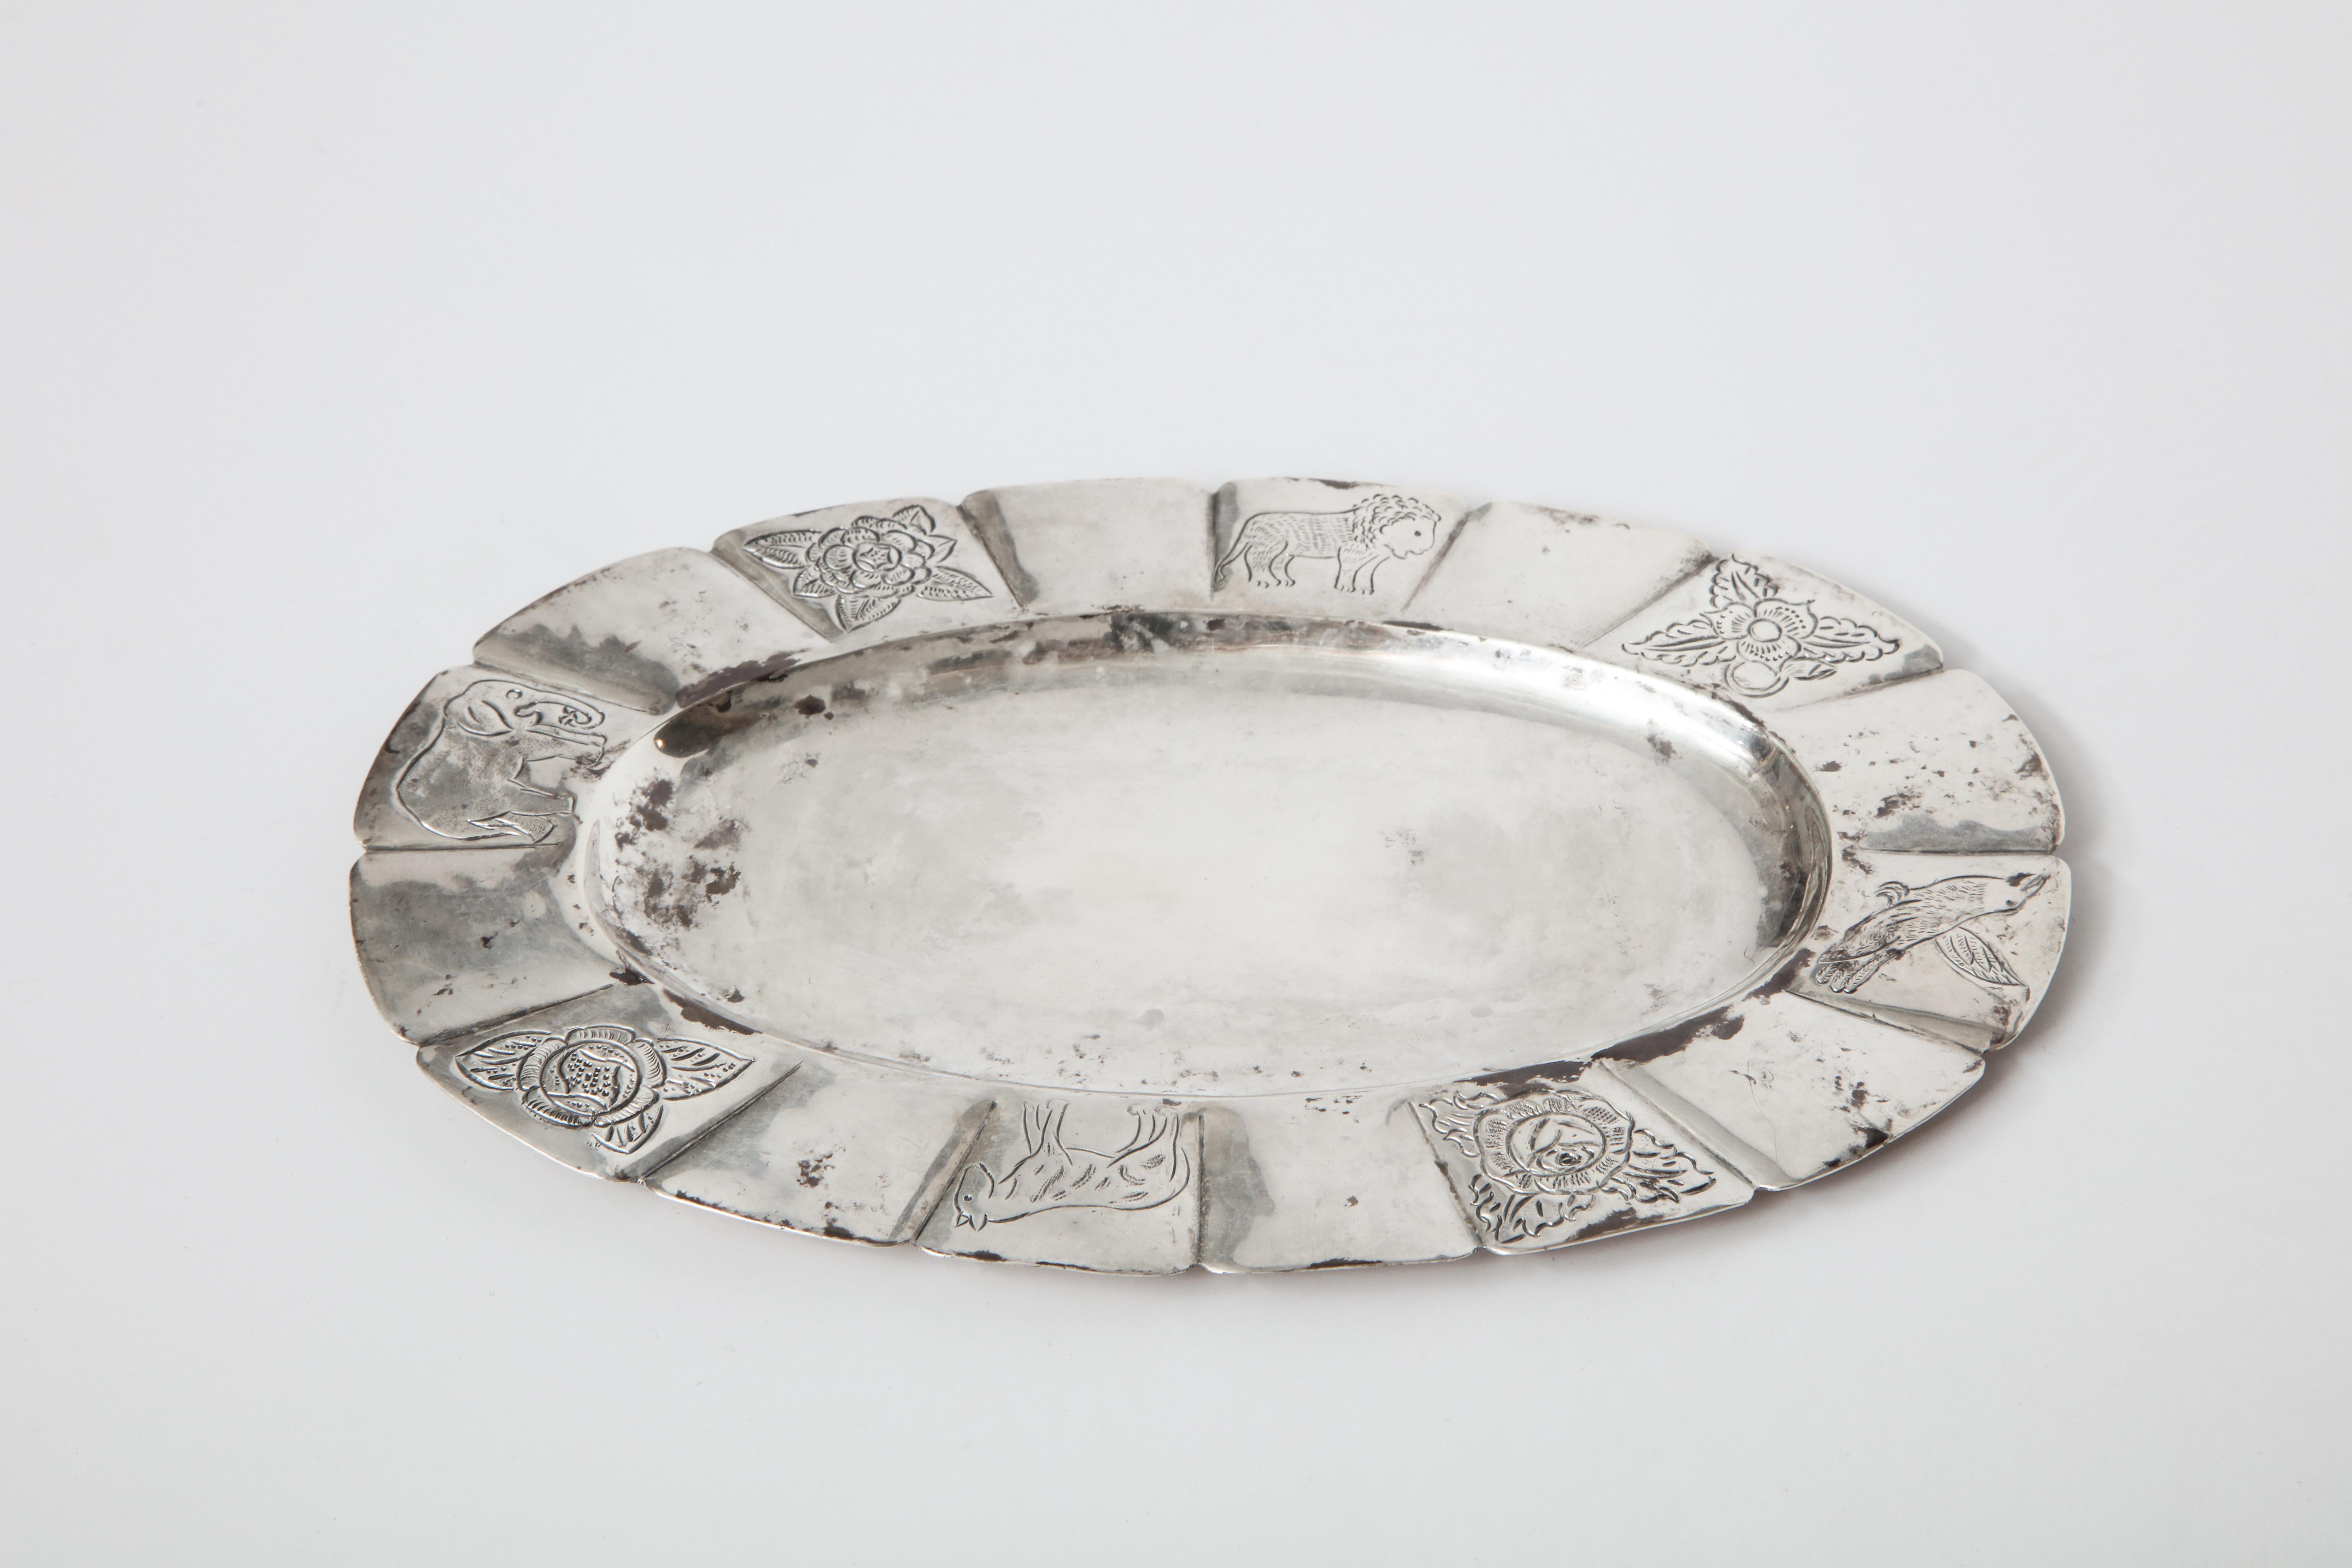 Oval Mexican sterling silver dish with flora and fauna hand-engraved border, circa 1950s. Signed Sanborns.